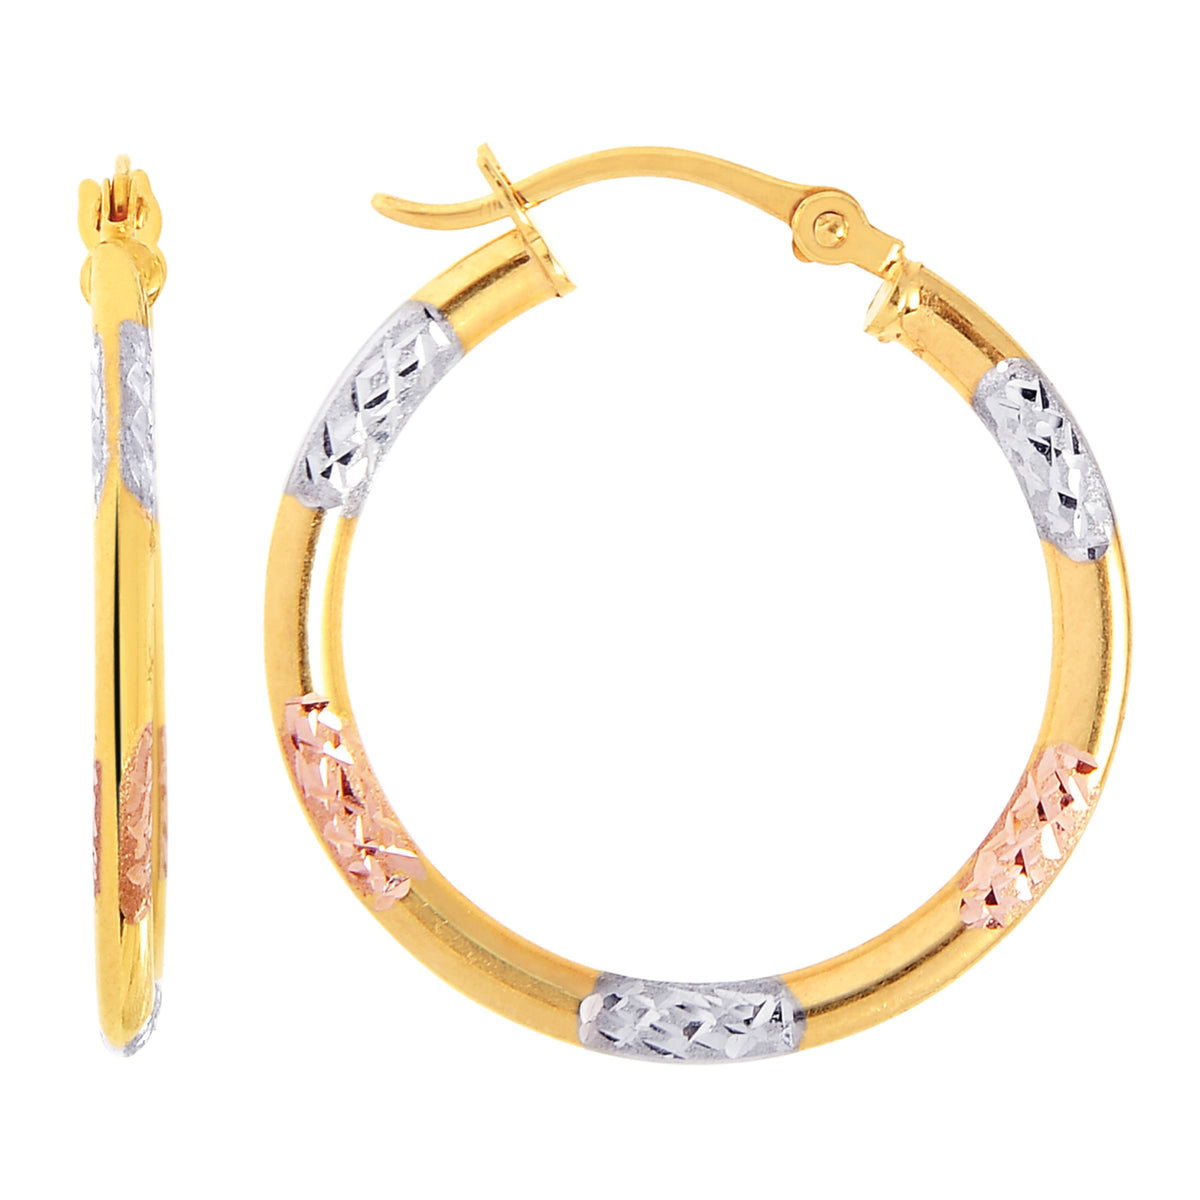 10k Tricolor White Yellow And Rose Gold Diamond Cut Round Hoop Earrings, Diameter 20mm fine designer jewelry for men and women